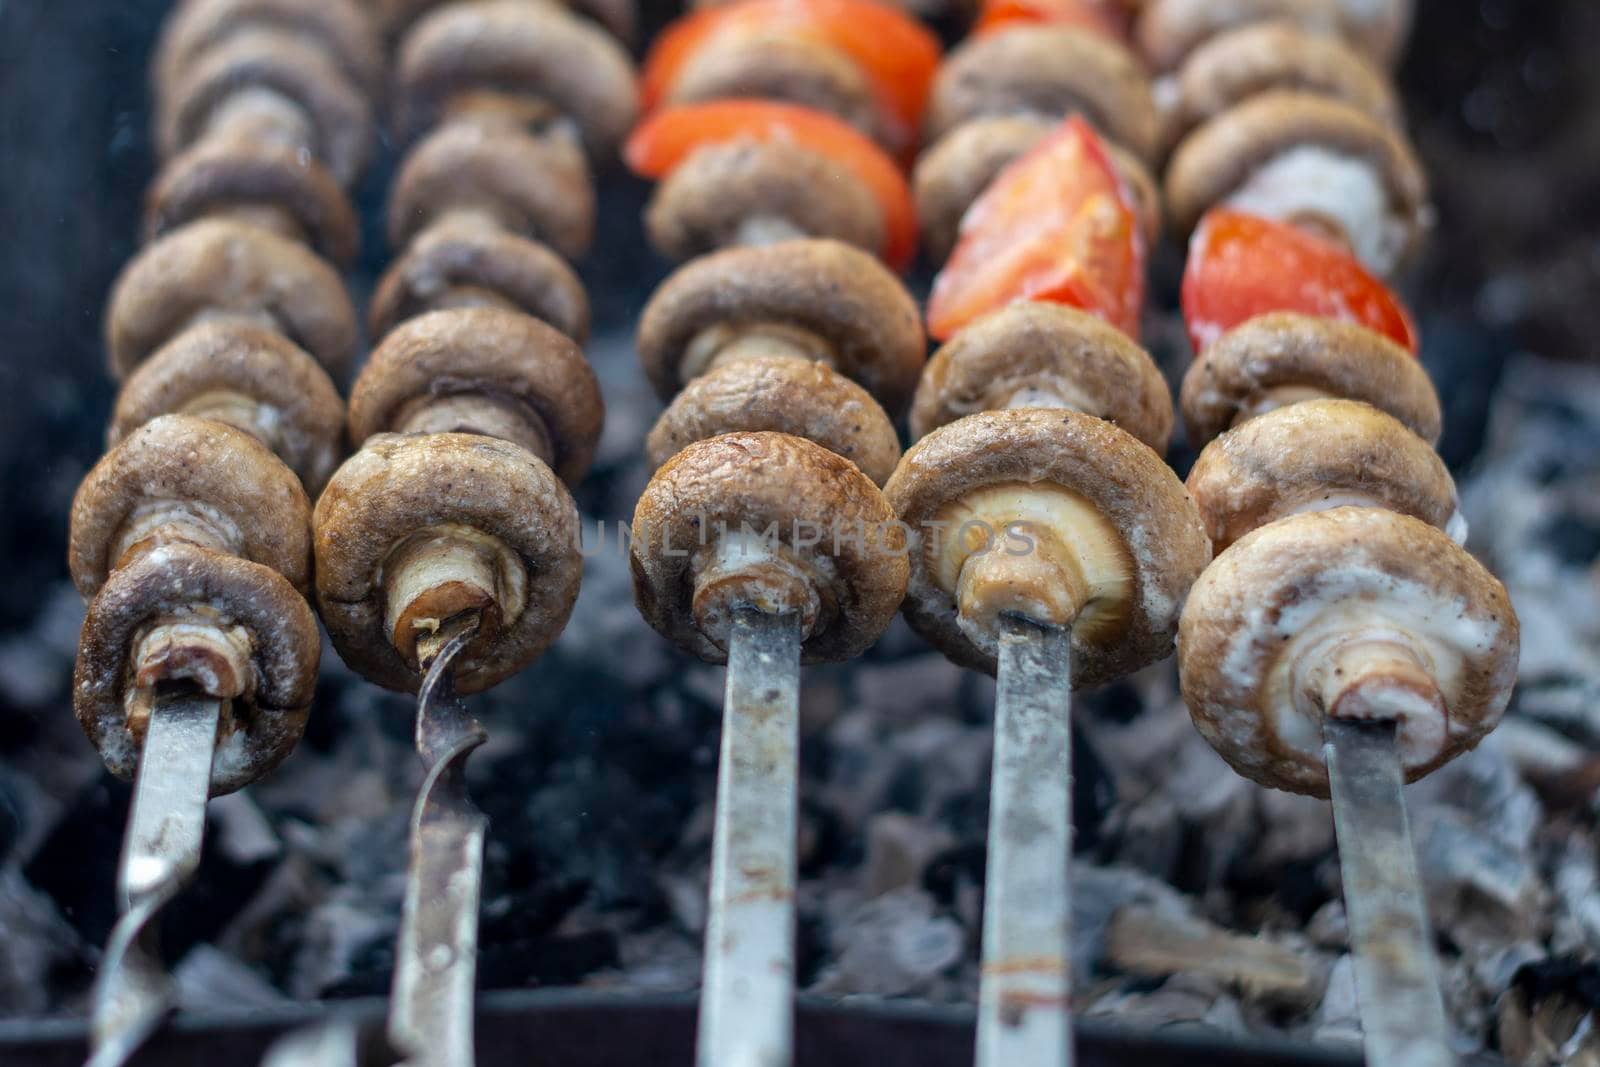 Mushrooms on skewers roast on coals. Barbeque. In nature, on the grill, mushrooms in combination with tomatoes. by Essffes